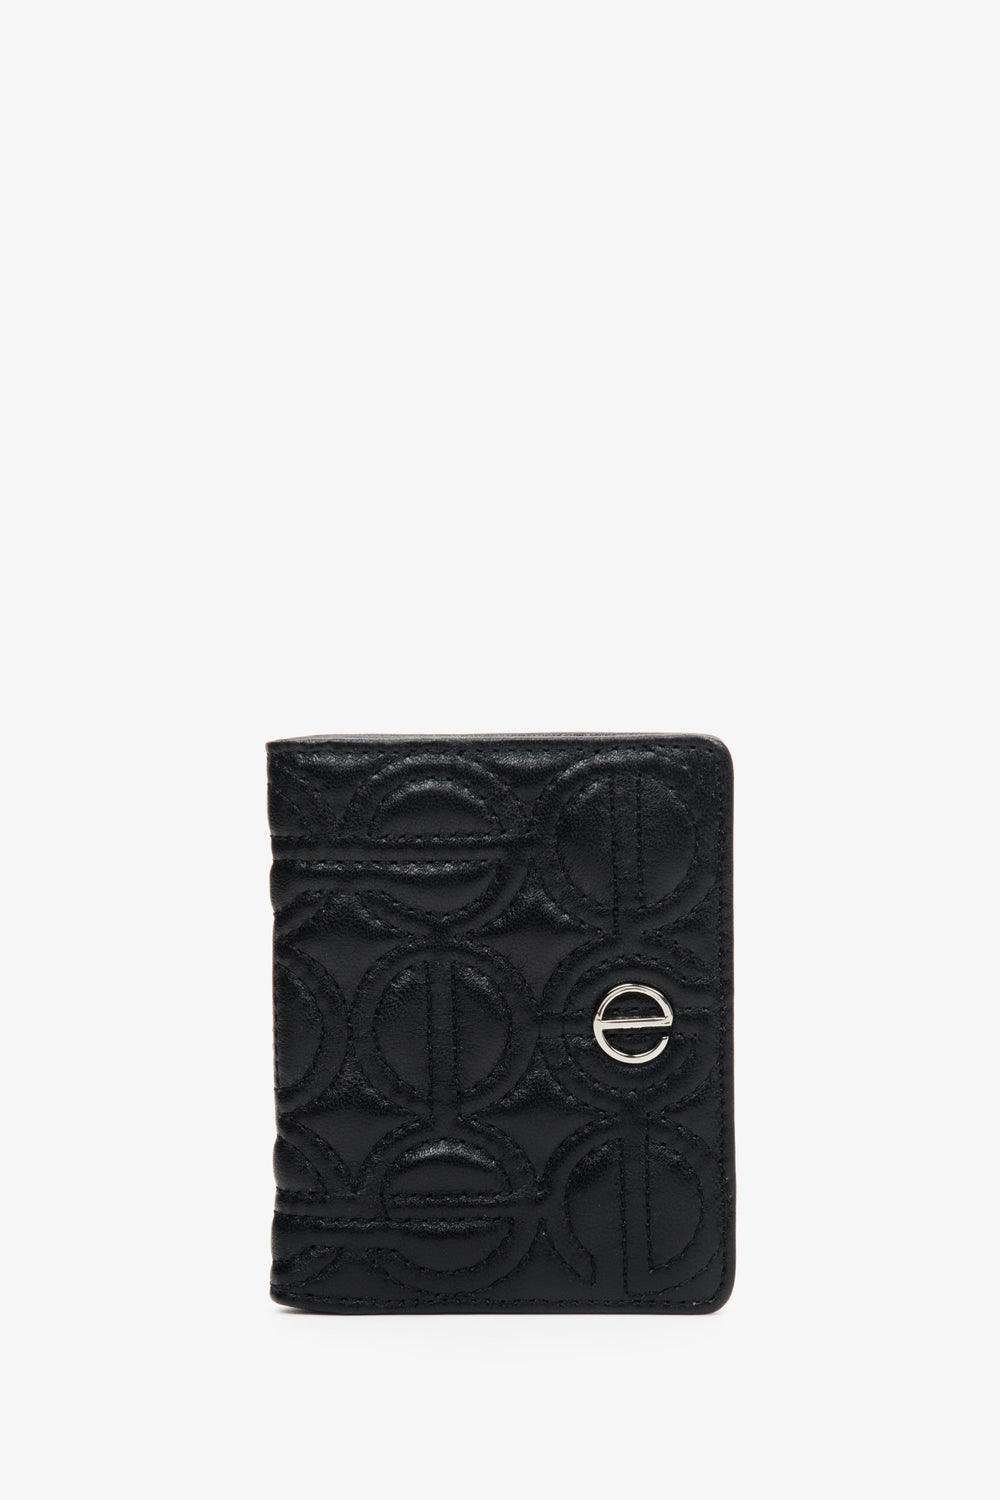 Women's Black Card Wallet made of Genuine Leather with Silver Accents Estro ER00113655.